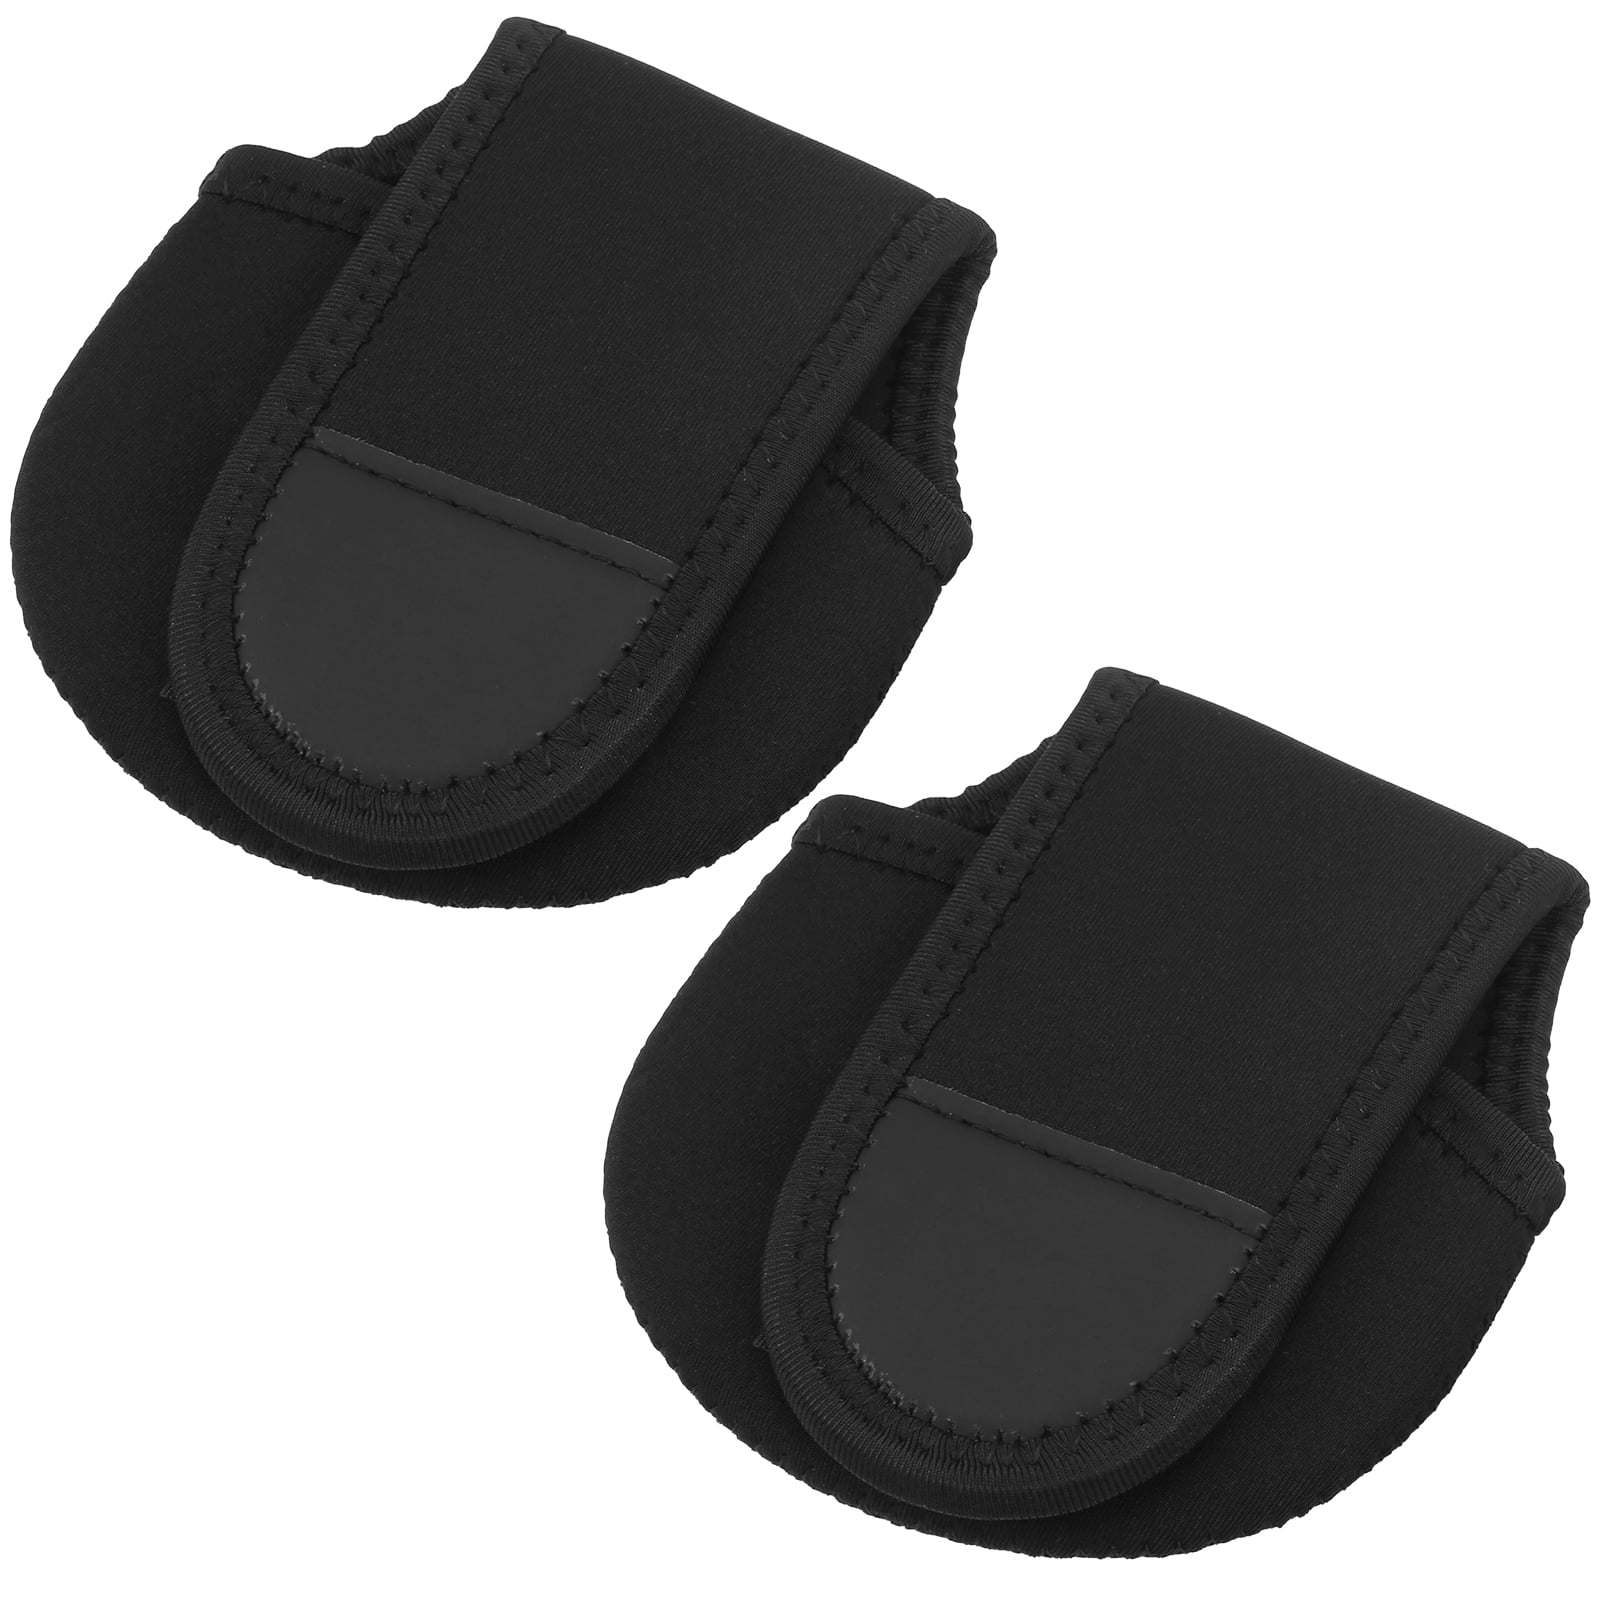 Baitcasting Reel Cover 2Pcs Baitcasting Reel Cover Case Protector Water-Proof Baitcast Reel Protective Case Pouch